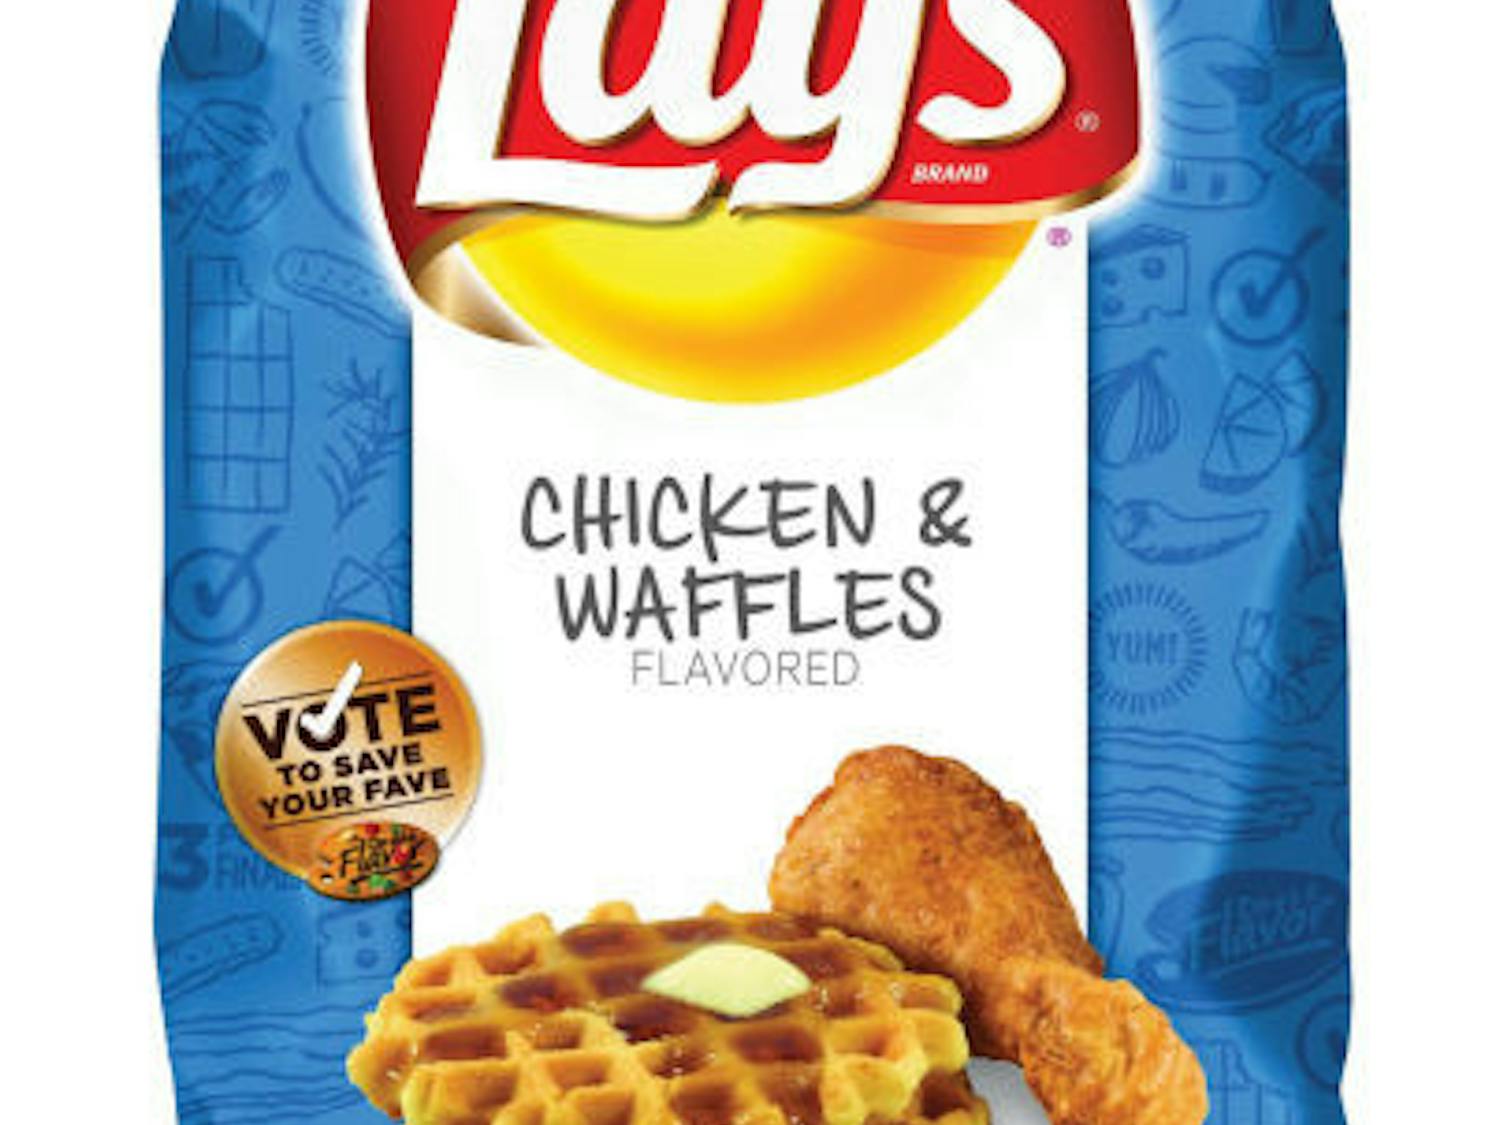 This product photo provided by Lay's shows a bag of their Chicken &amp; Waffles flavored potato chips. The new flavor, along with two others - Cheesy Garlic Bread and the Thai-inspired Sriracha - will be sold at retailers nationwide starting in mid-February 2013. After trying them, fans have until May to vote for their favorite. The flavor with the most votes in May will stay on store shelves. The other two will be discontinued. (AP Photo/Lay's)